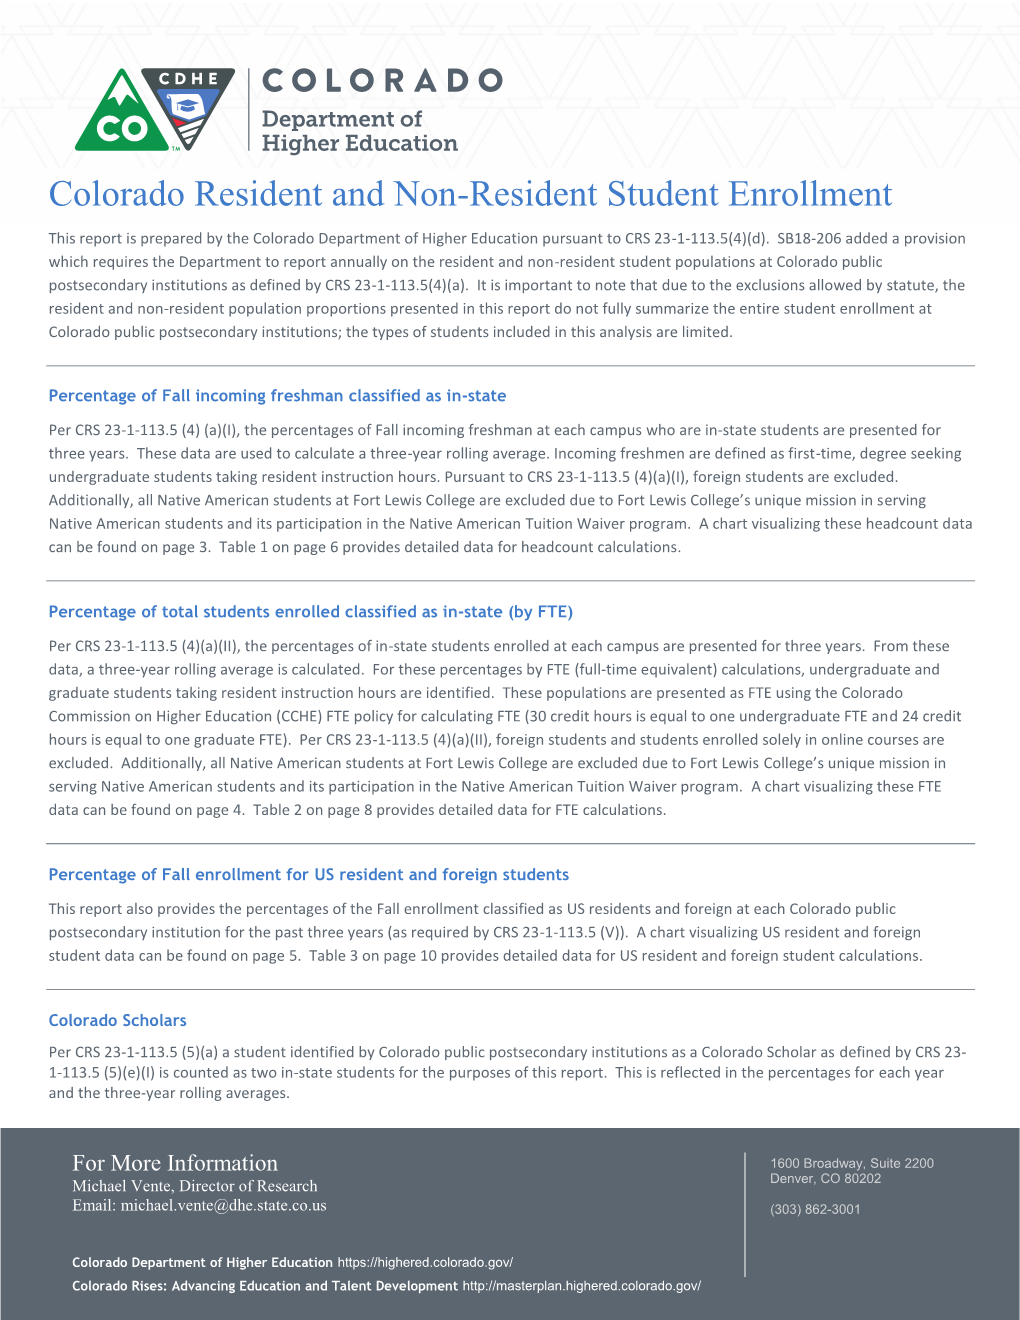 Colorado Resident and Non-Resident Student Enrollment